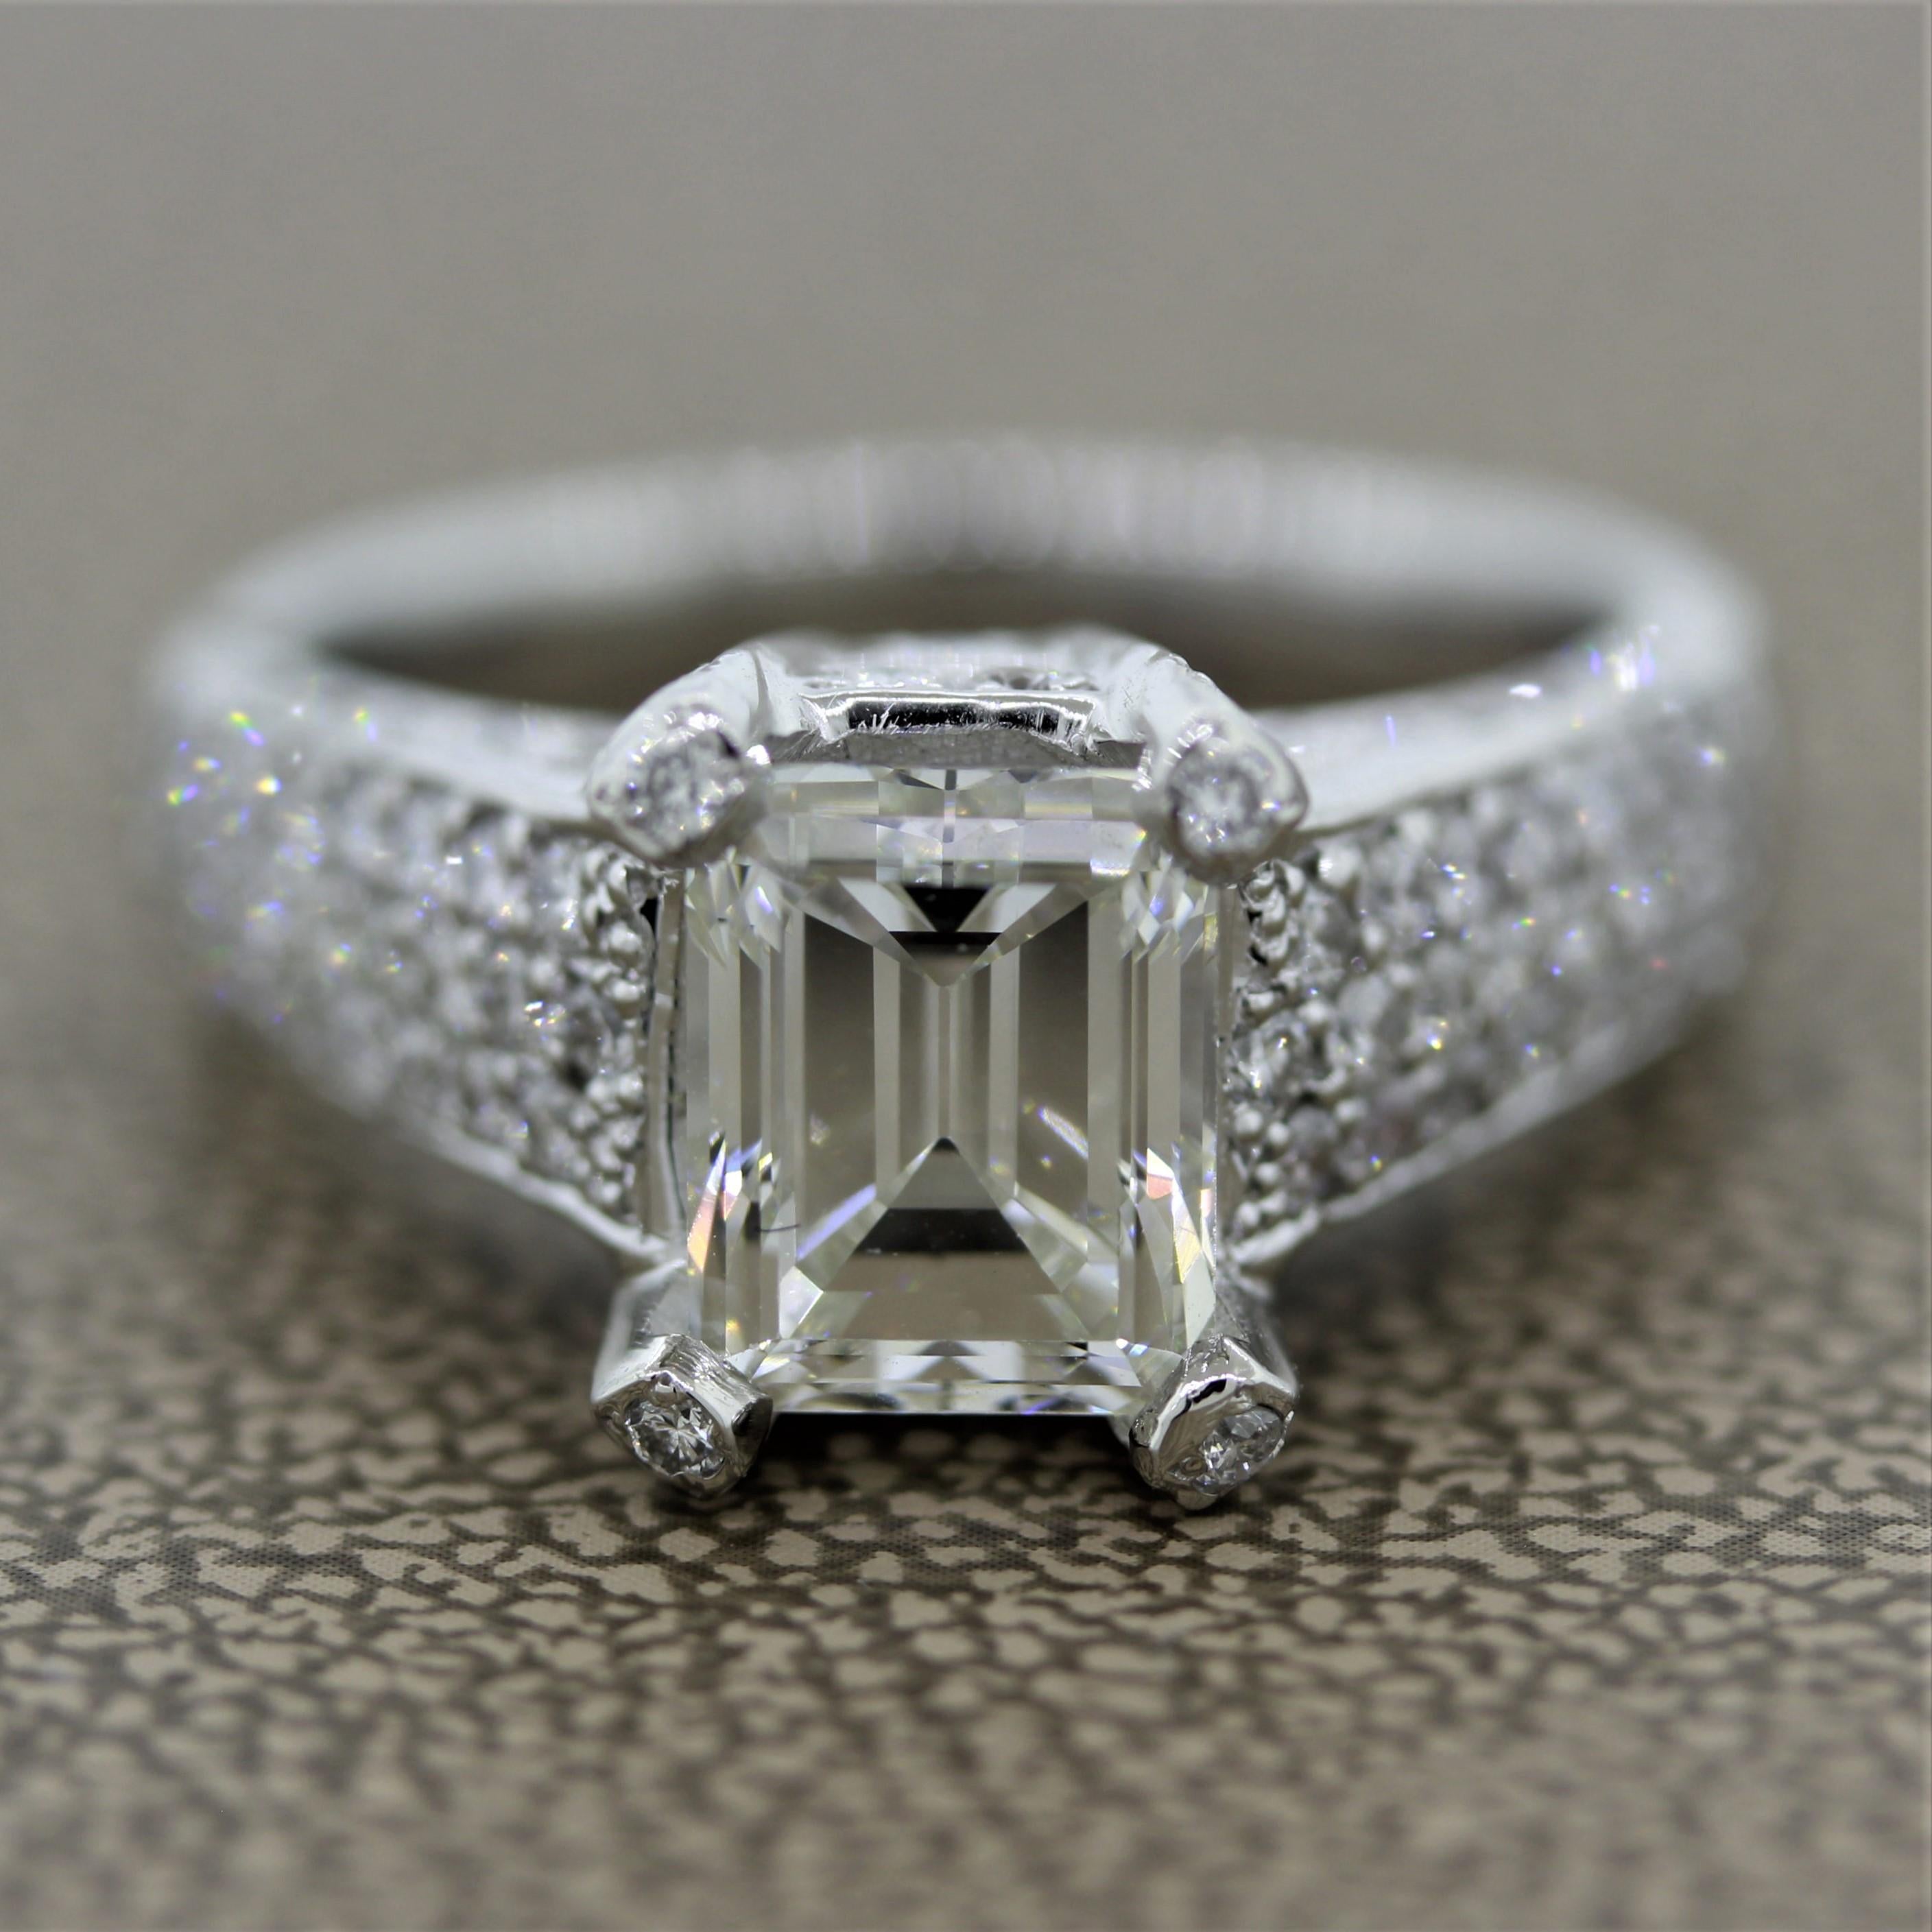 A lovely diamond engagement ring featuring a 2.62 carat emerald cut diamond certified by the GIA with I color and VS2 clarity. The ring is accented by 1.11 carats of round brilliant cut diamonds which are set around the settings and sides of the